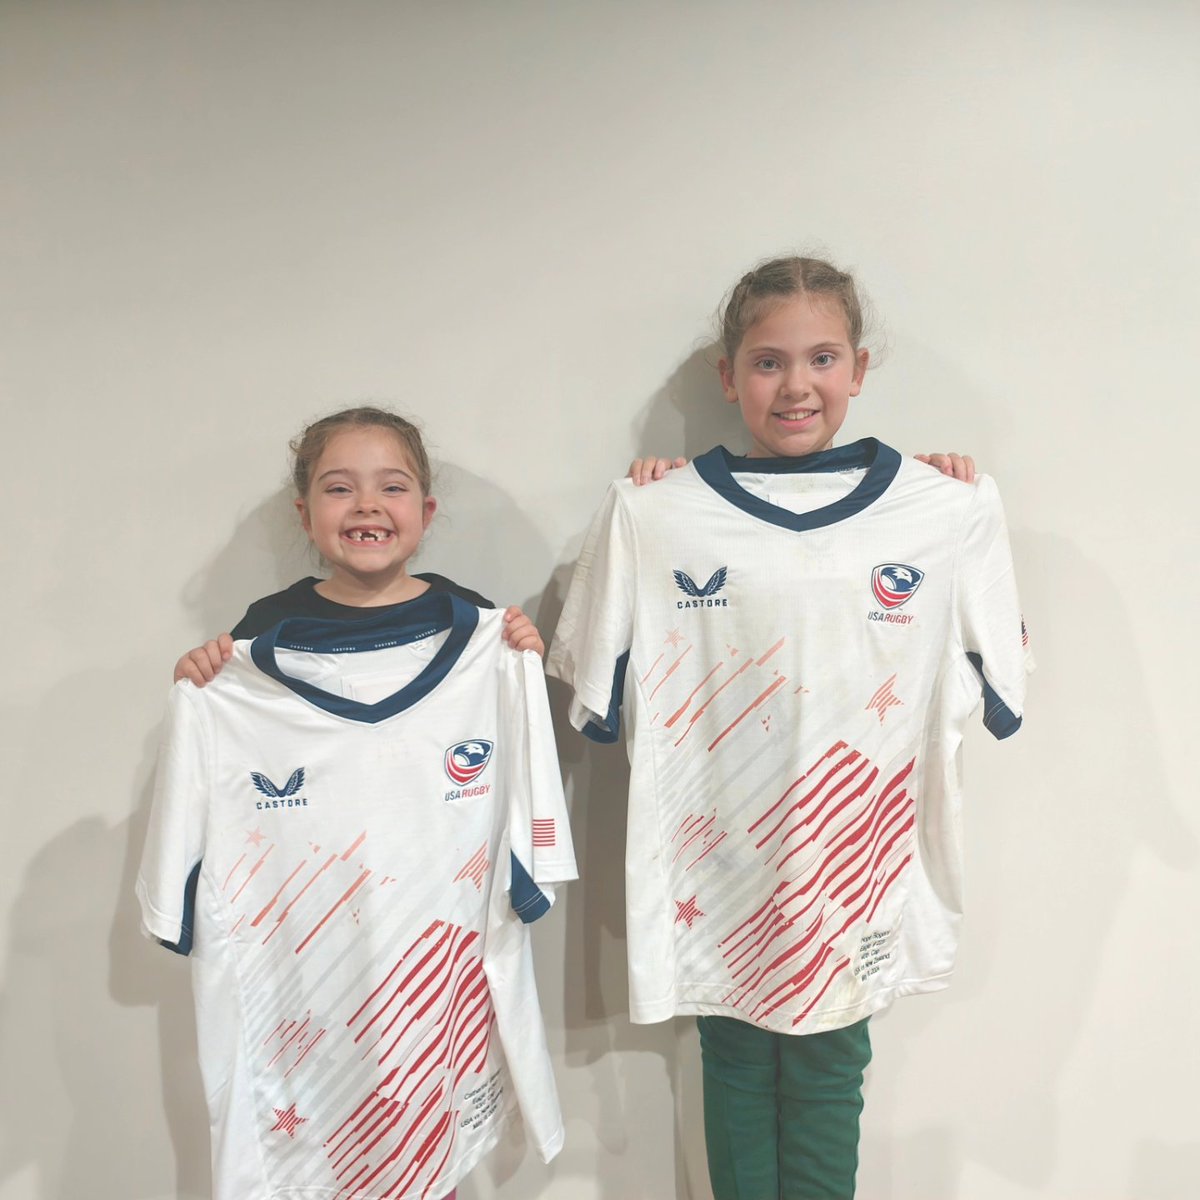 @alicesoapbox Some positive women's role models, Hope Rogers met with our girls after the black ferns USA game on Saturday and gifted them a game shirt after remembering them from Pac4 and RWC2022. We also got a game shirt from Catie Benson! They're my girls' favourite players now!